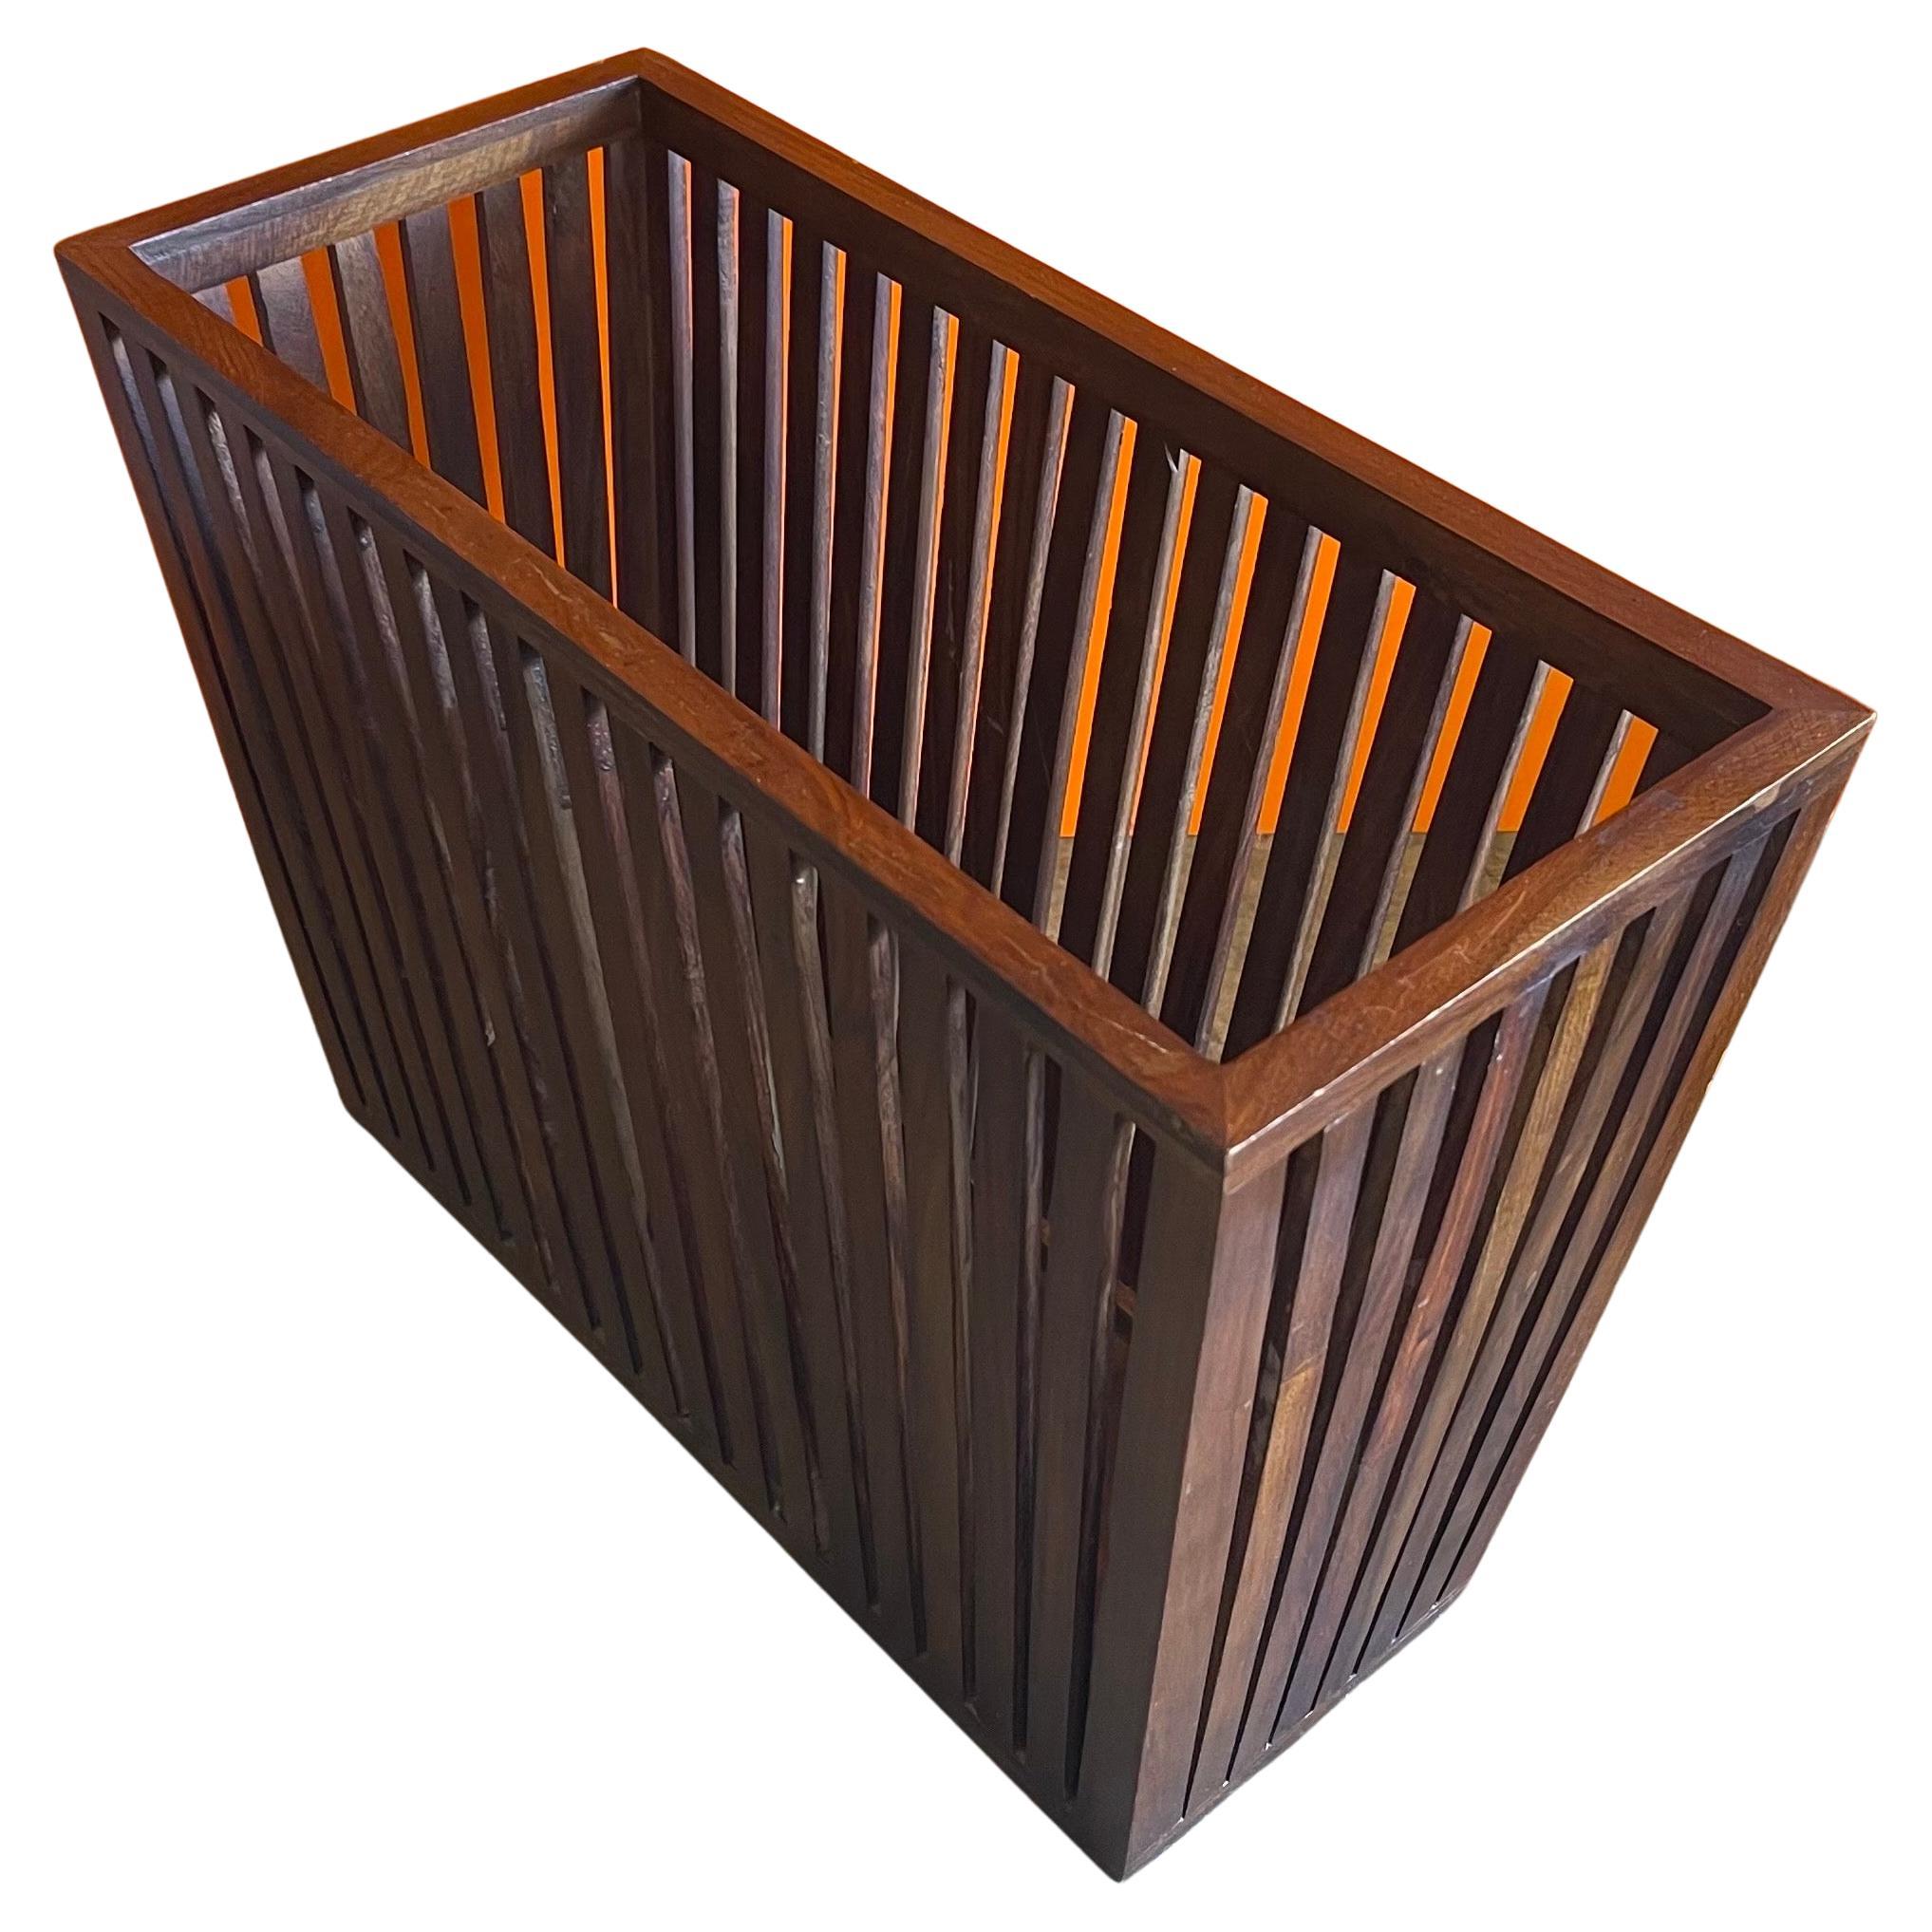 A beautiful Mid-Century Modern walnut slat magazine holder, circa 1970s. The piece is in very good vintage condition and measures 16.5